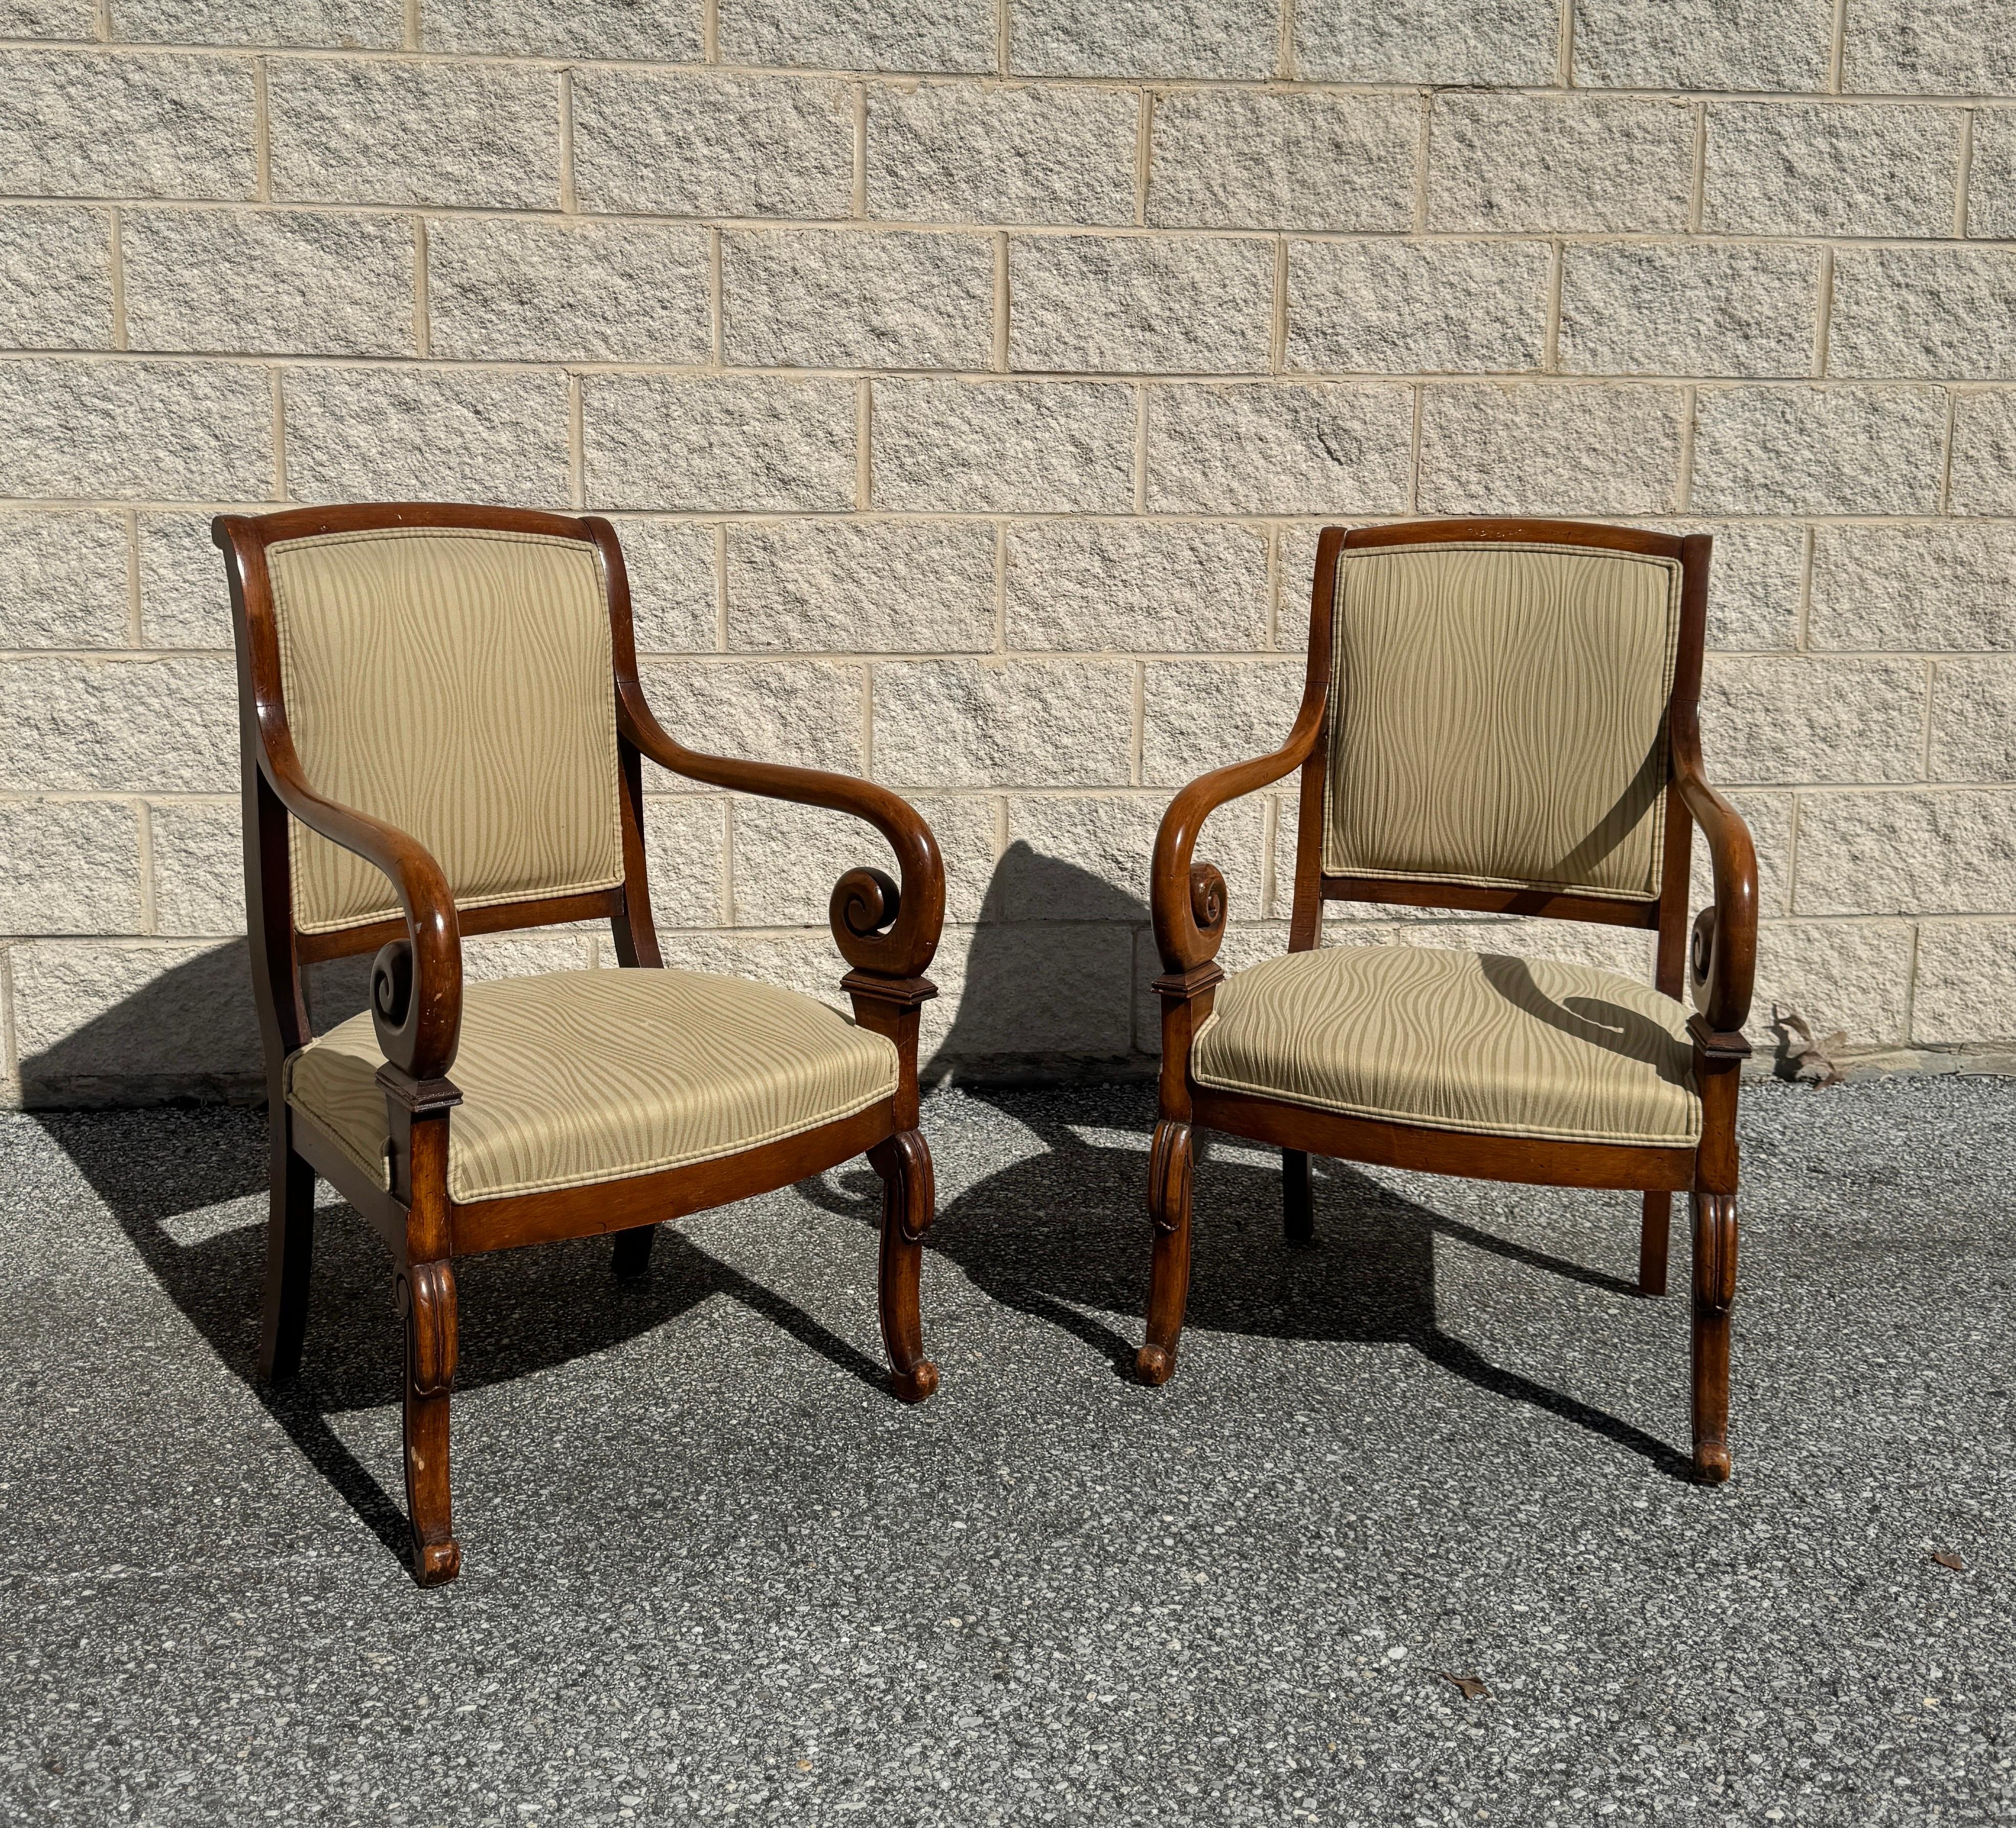 Crafted from quality mahogany wood, upholstered in neutral cream fabric. 